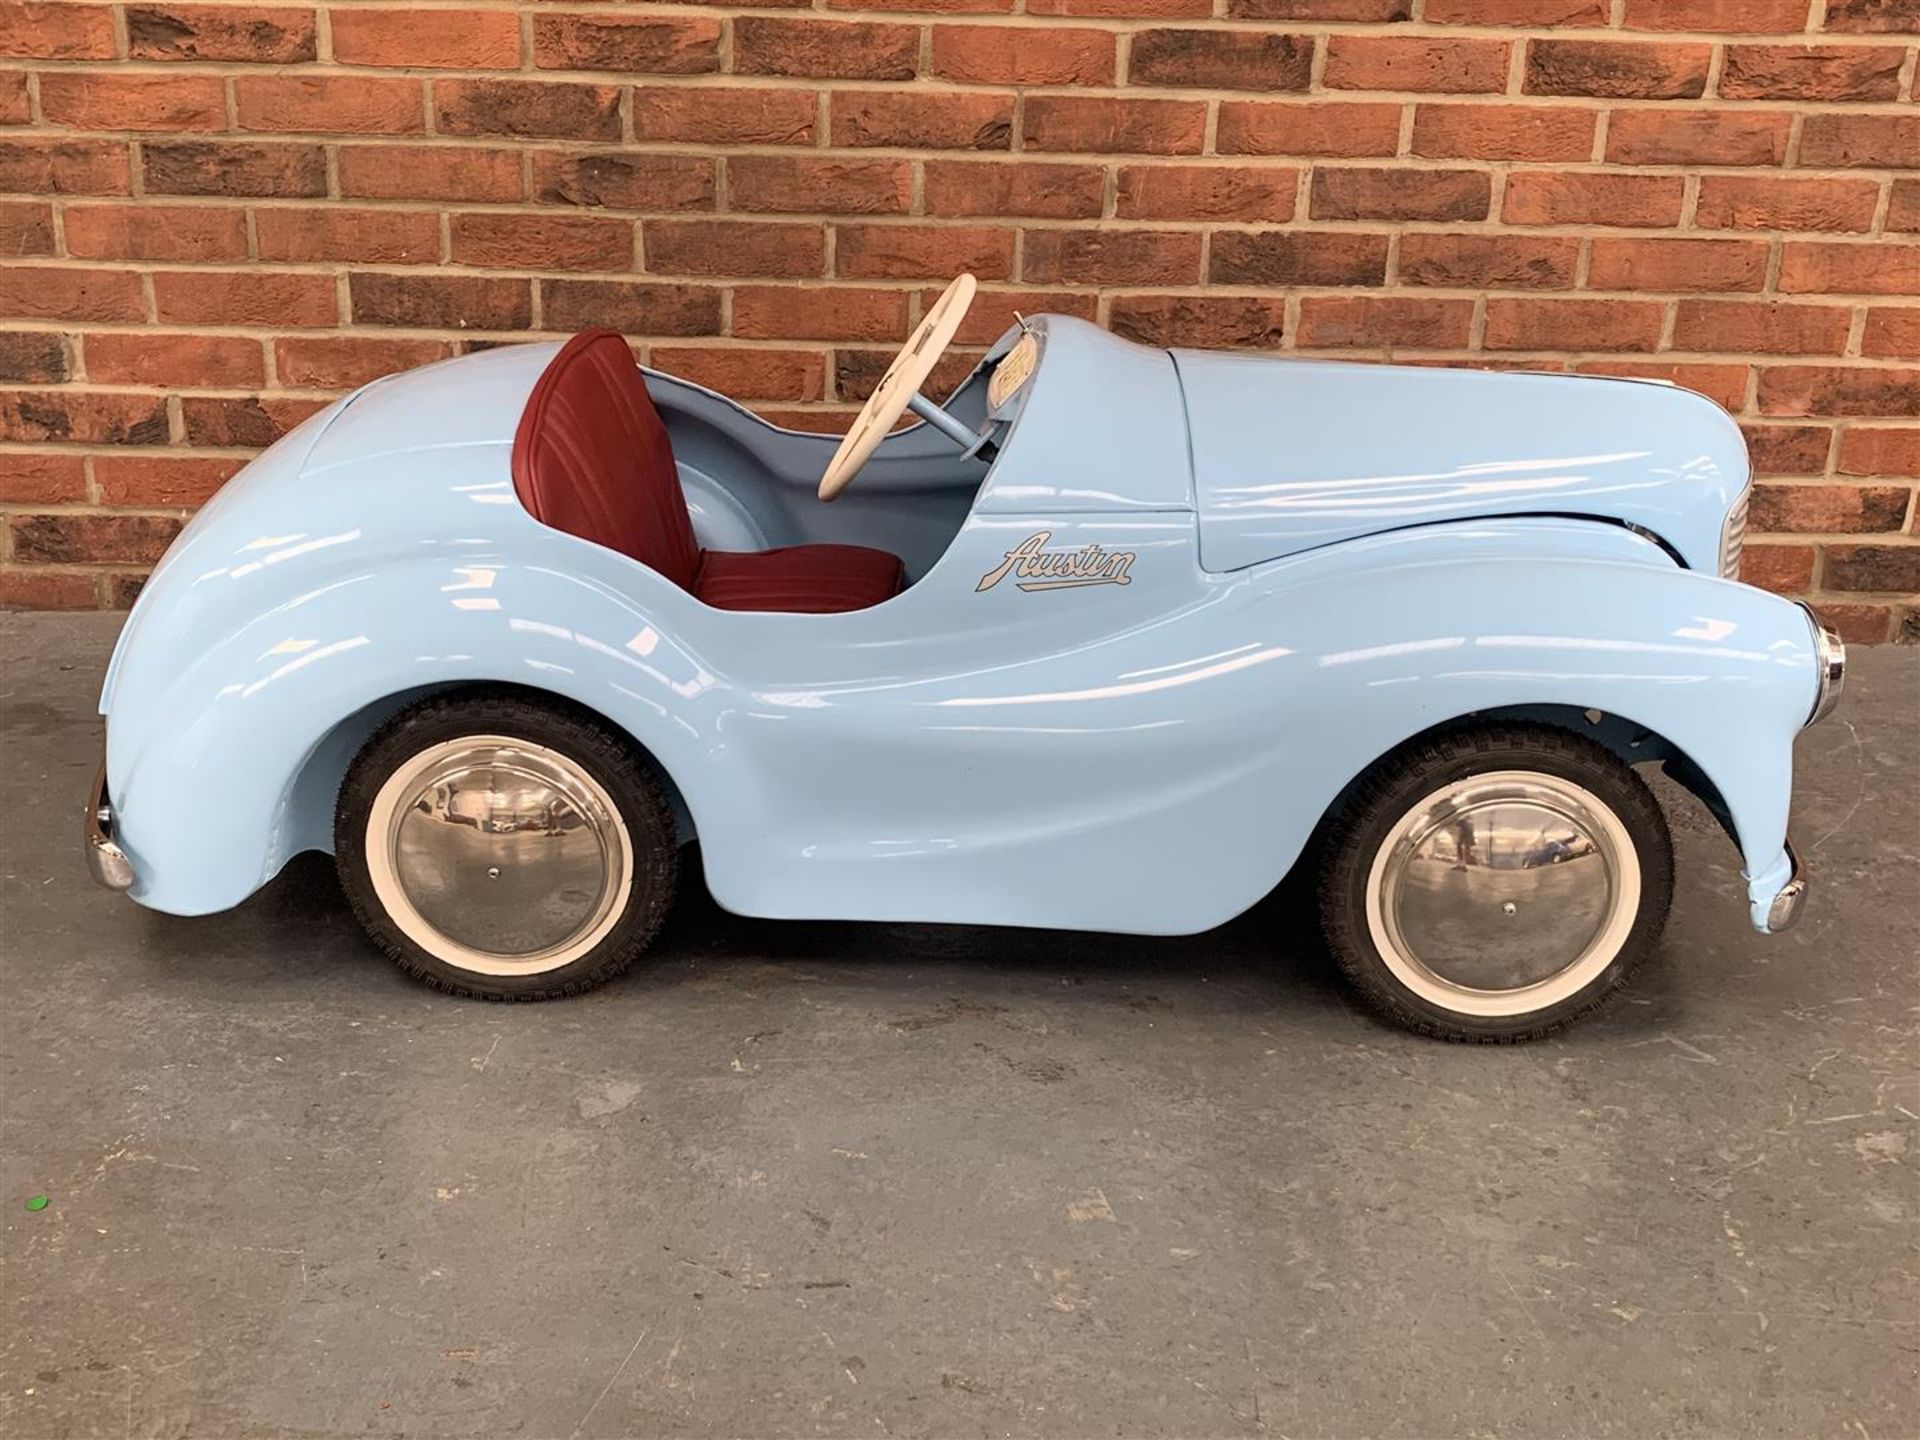 Austin J40 Child's Pedal Car (Fully Restored With Working Lights) - Image 8 of 12